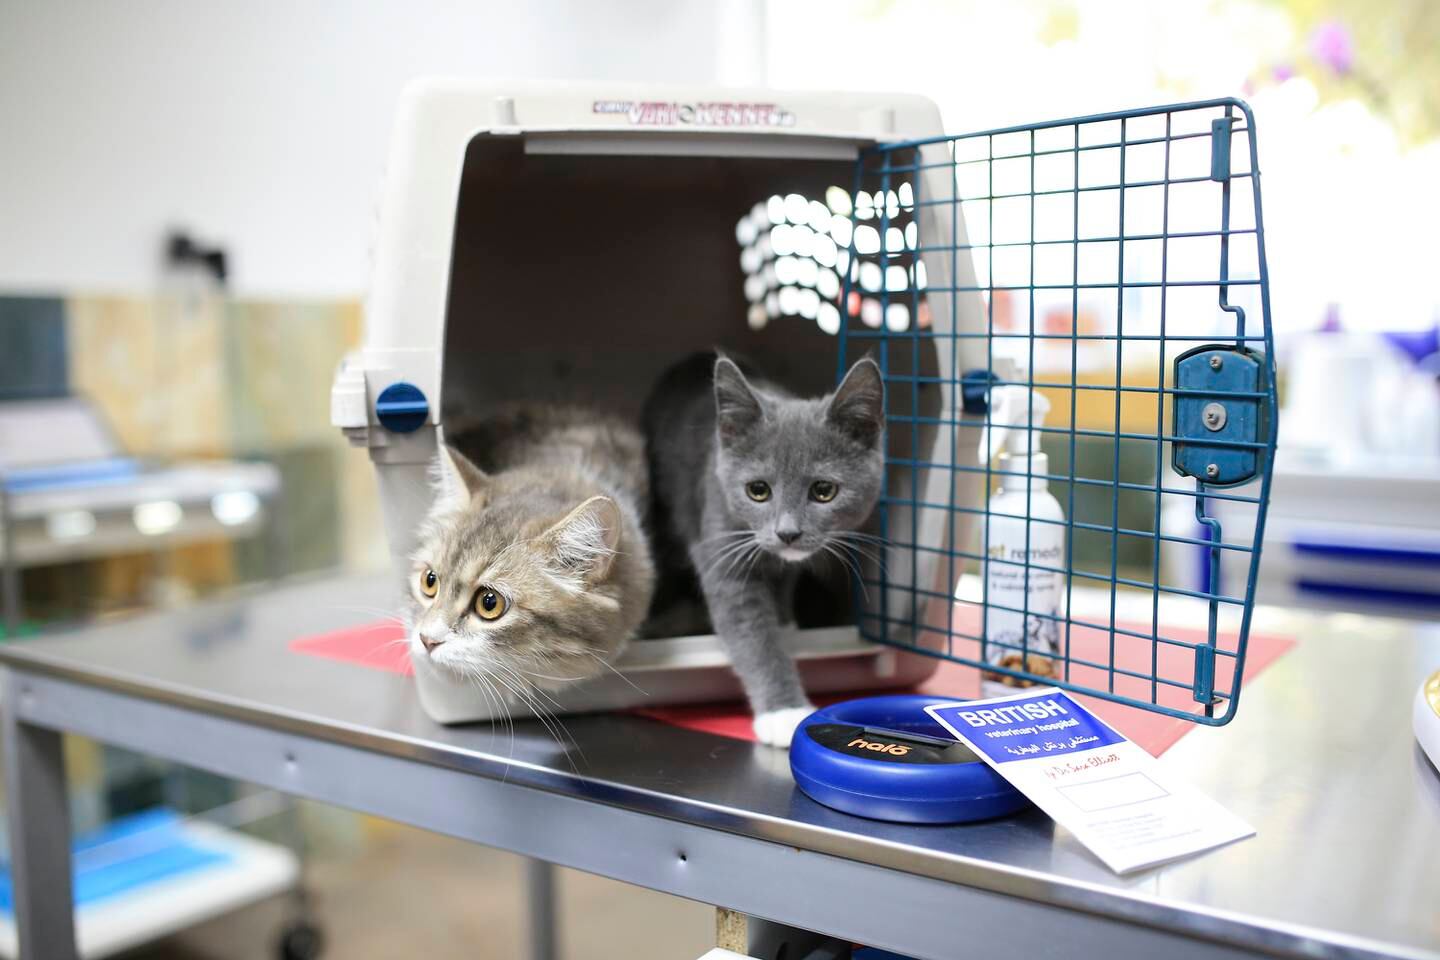 DUBAI, November 20, 2013 - (L to R) Craig, a 6-month-old kitten and Stewart, a 4-month-old kitten, wait in their pet carrier with their vaccination records, at the British Veterinary Hospital in Dubai, November 20, 2013.  (Photo by: Sarah Dea/The National, Story by: Hareth Albustani, Weekend)


 *** Local Caption ***  SDEA201113-shippingpets18.JPG